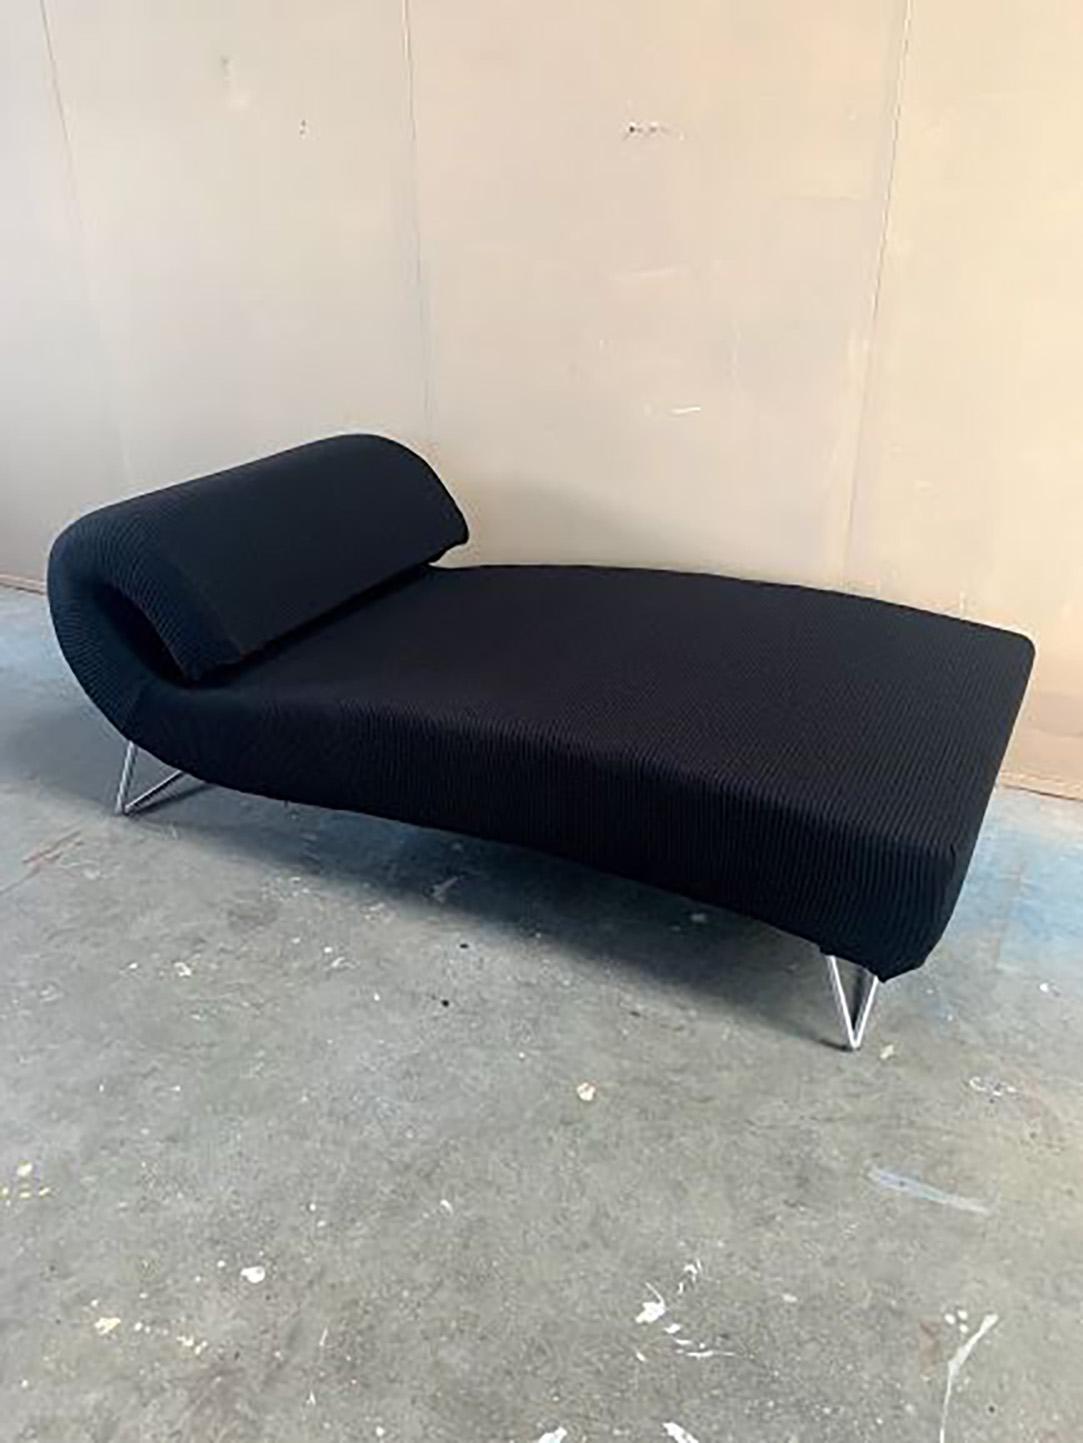 Contemporary Pascal Mourgue, Ligne Roset, Sofa, Daybed 2004